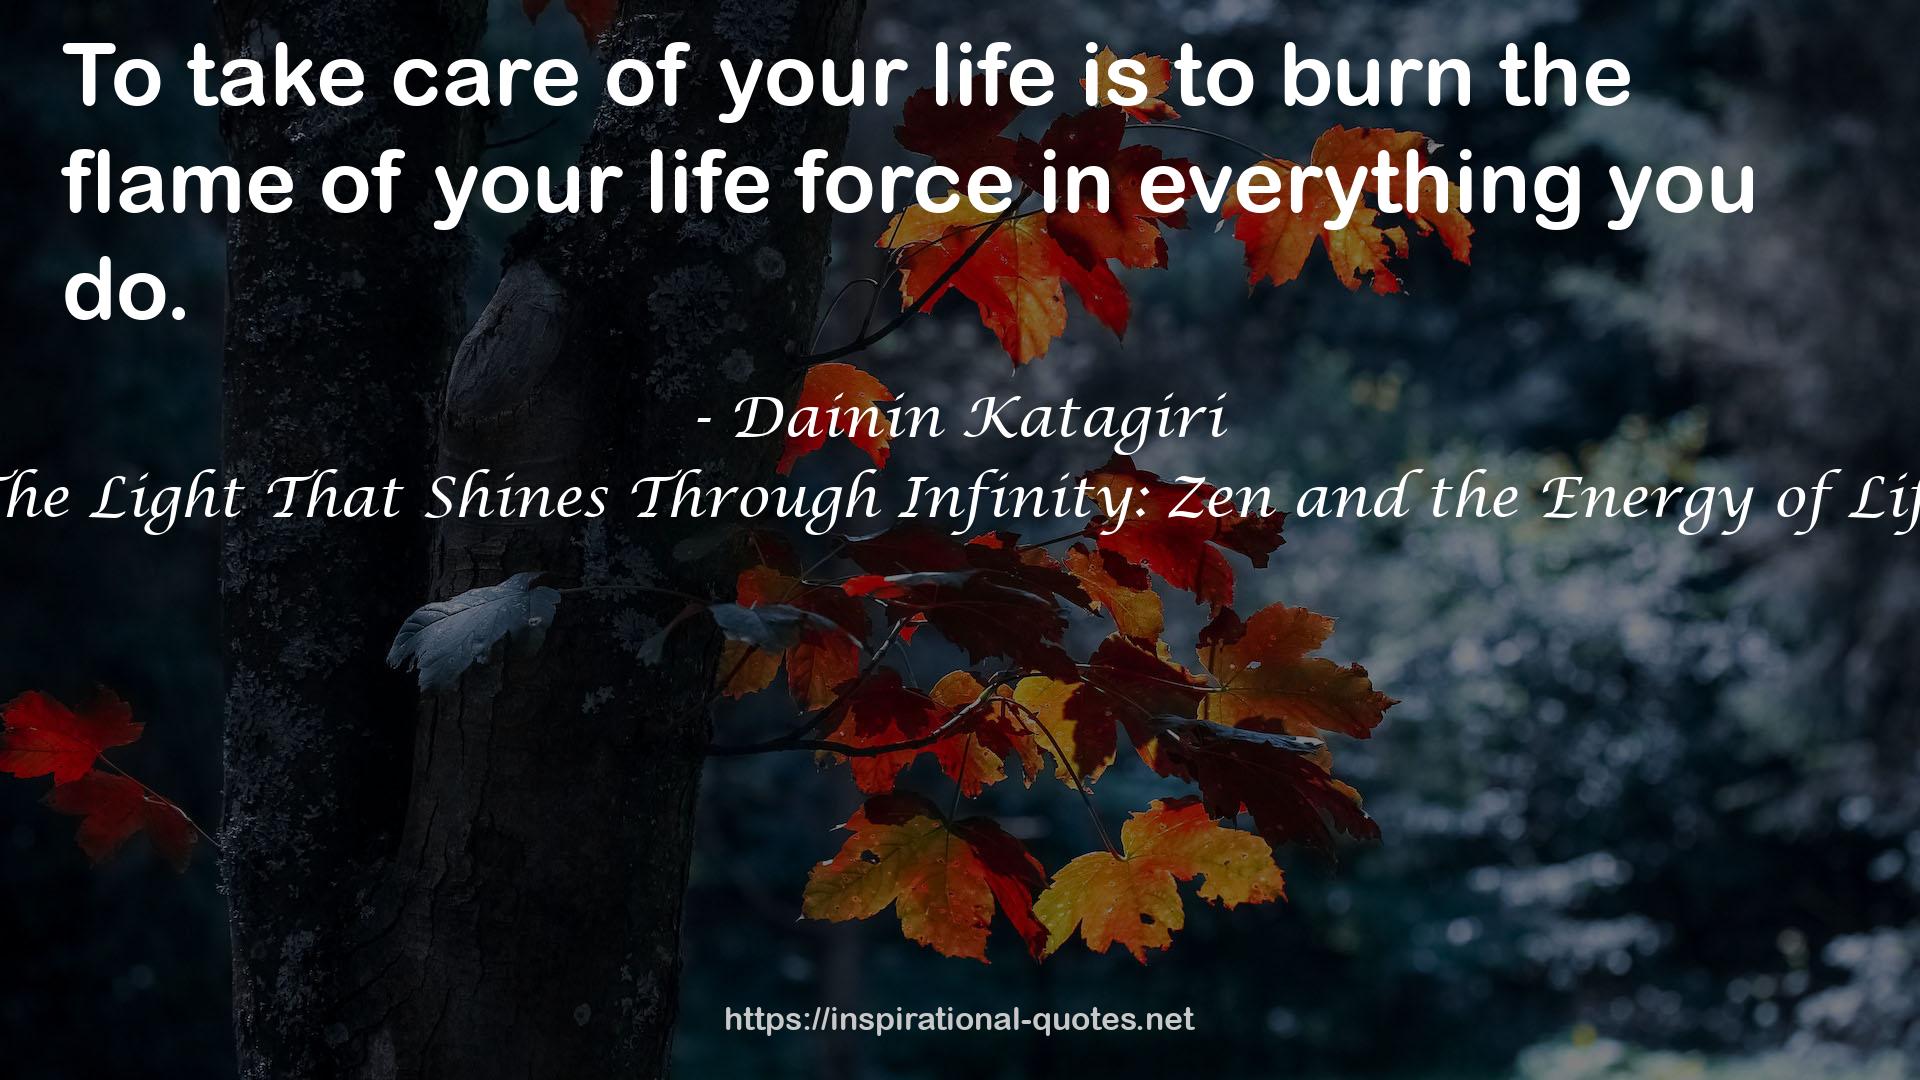 The Light That Shines Through Infinity: Zen and the Energy of Life QUOTES